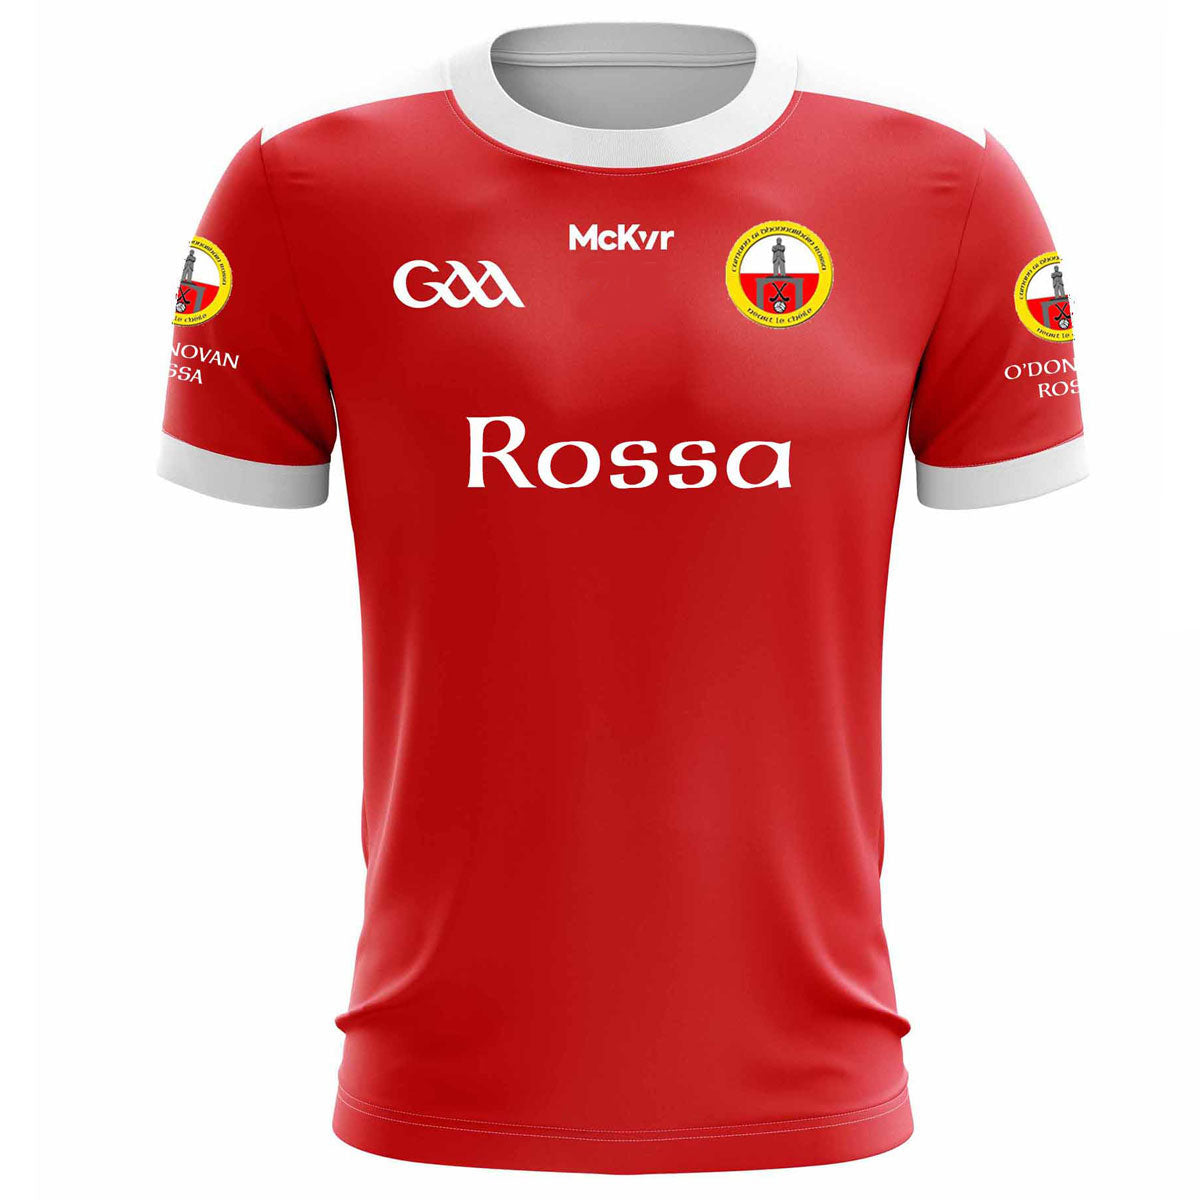 Mc Keever O'Donovan Rossa GAA Playing Jersey - Youth - Red/White